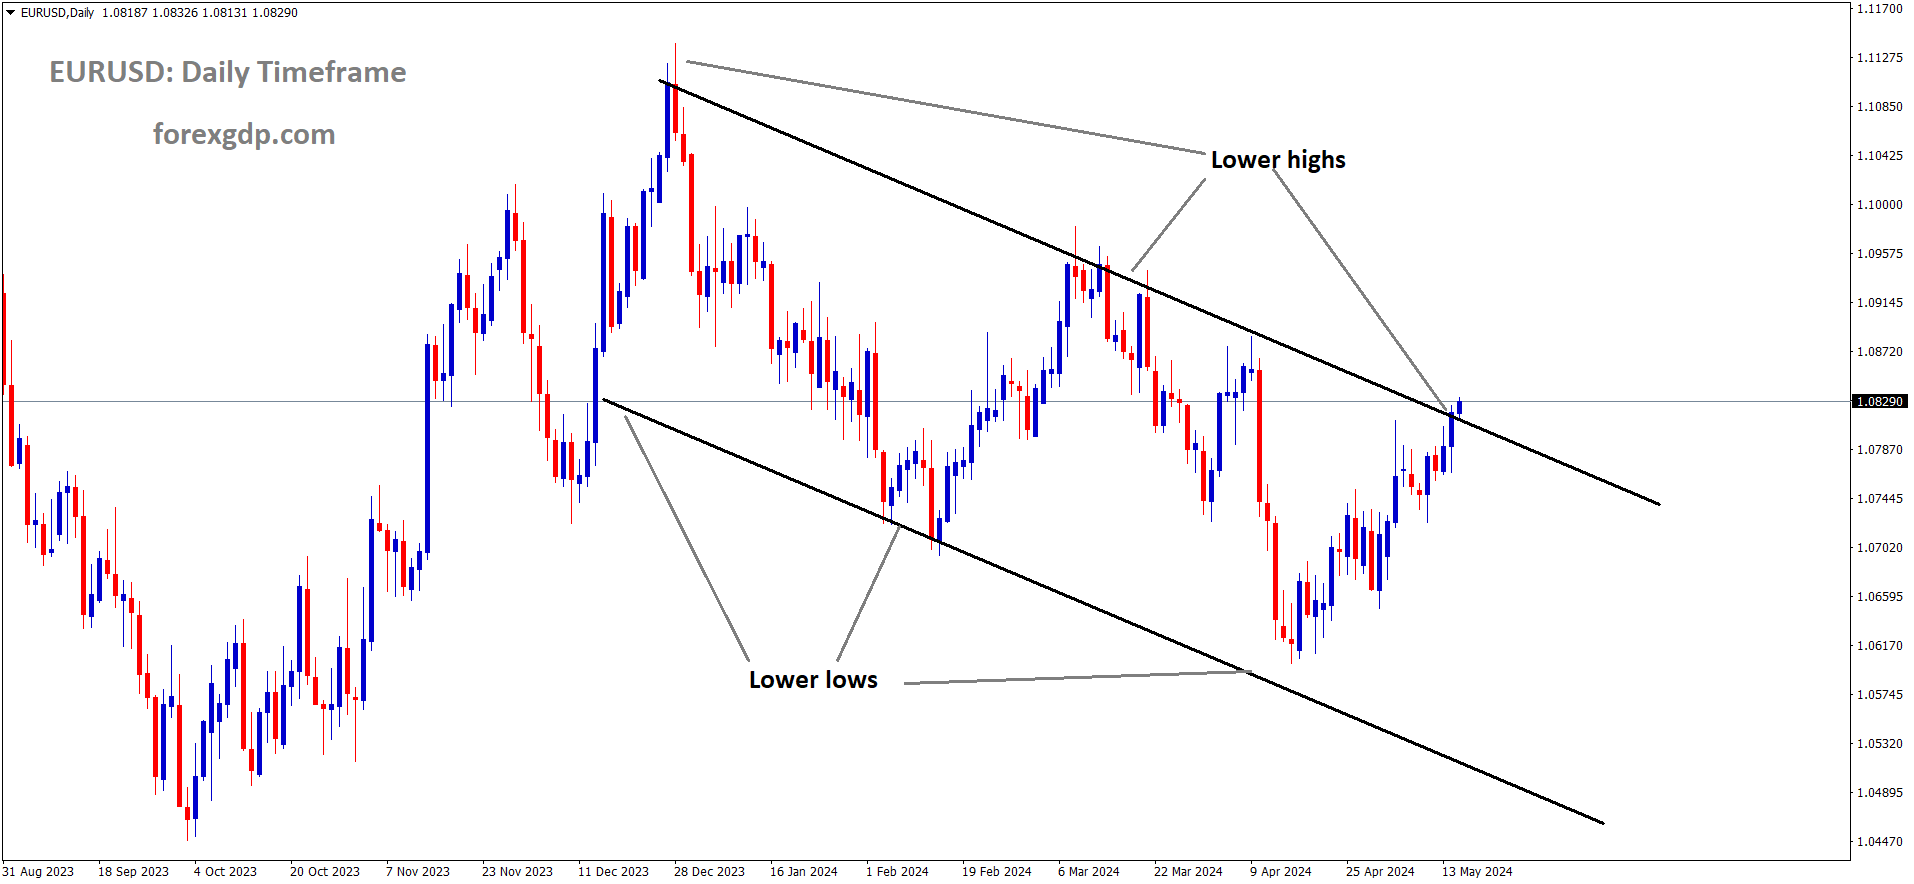 EURUSD is moving in the Descending channel and the market has reached lower high area of the channel